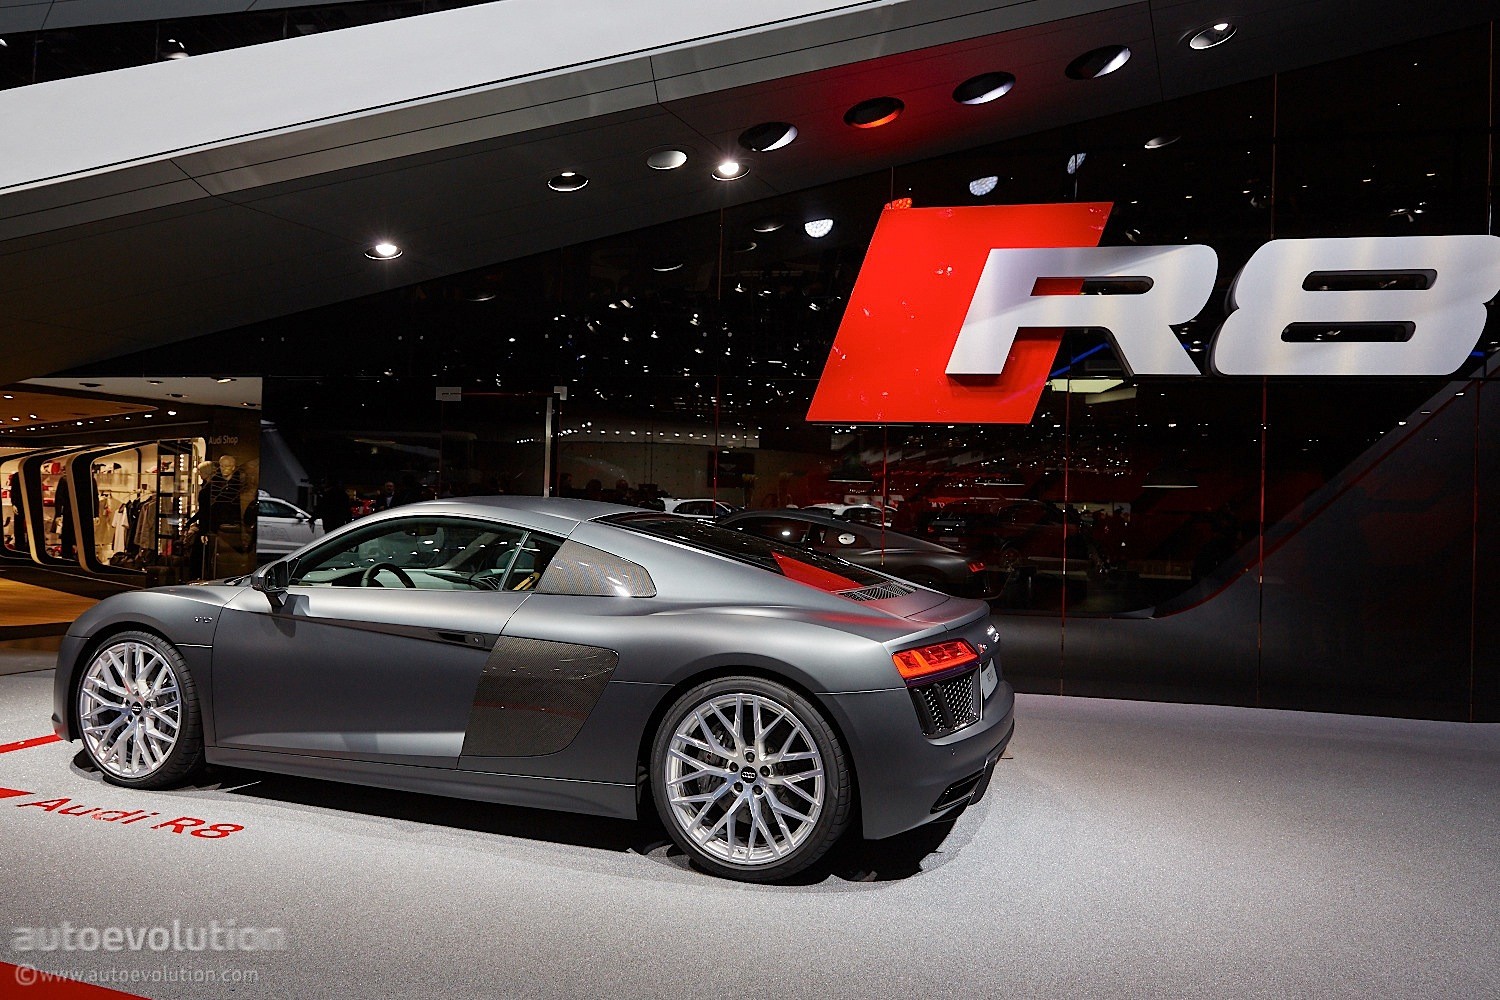 2015 - [Audi] R8 II / R8 II Spider - Page 10 2016-audi-r8-v10-reveals-the-next-era-of-german-supercars-in-geneva-live-photos_13